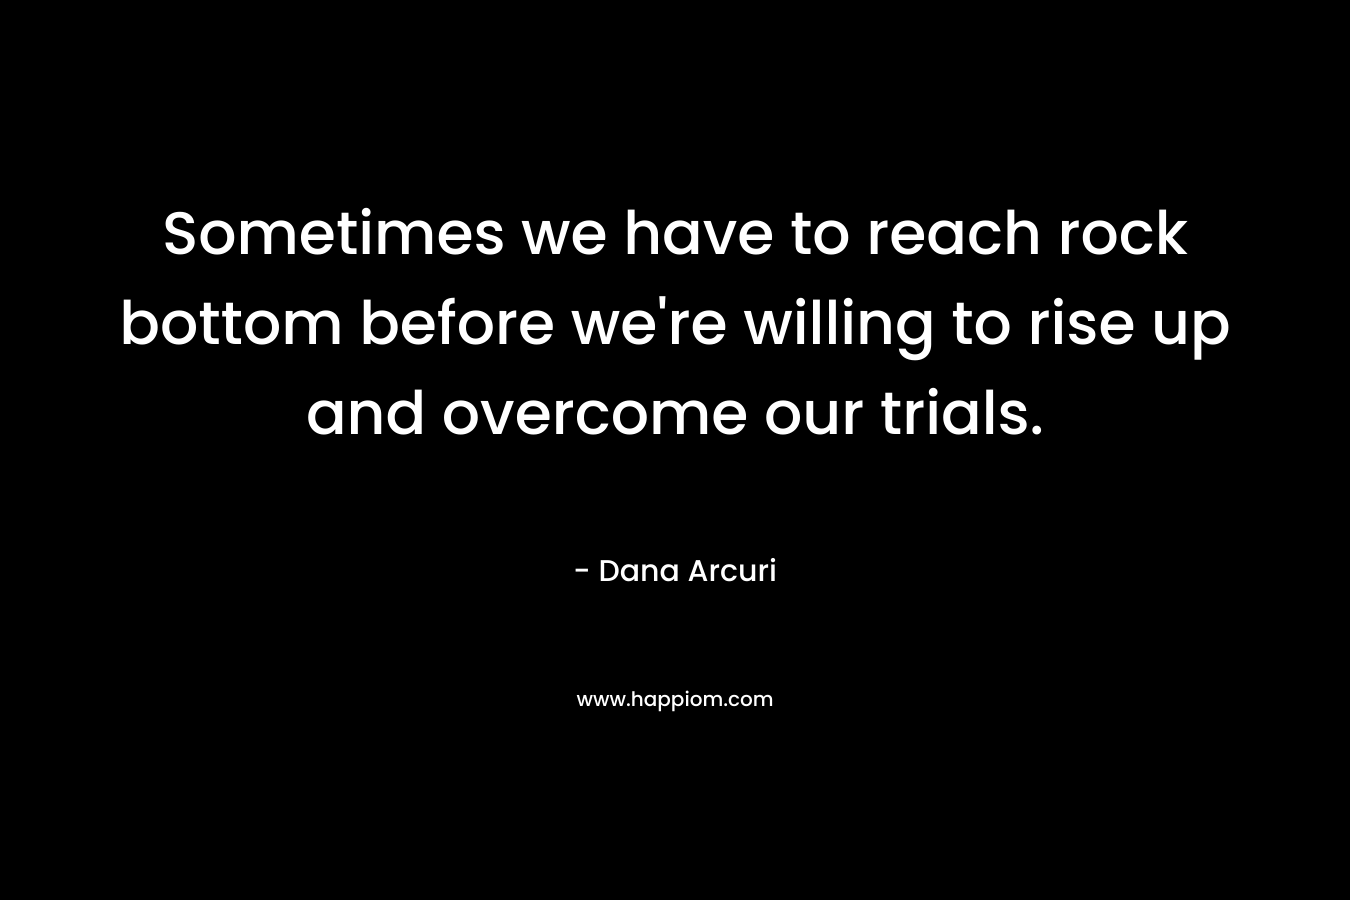 Sometimes we have to reach rock bottom before we're willing to rise up and overcome our trials.